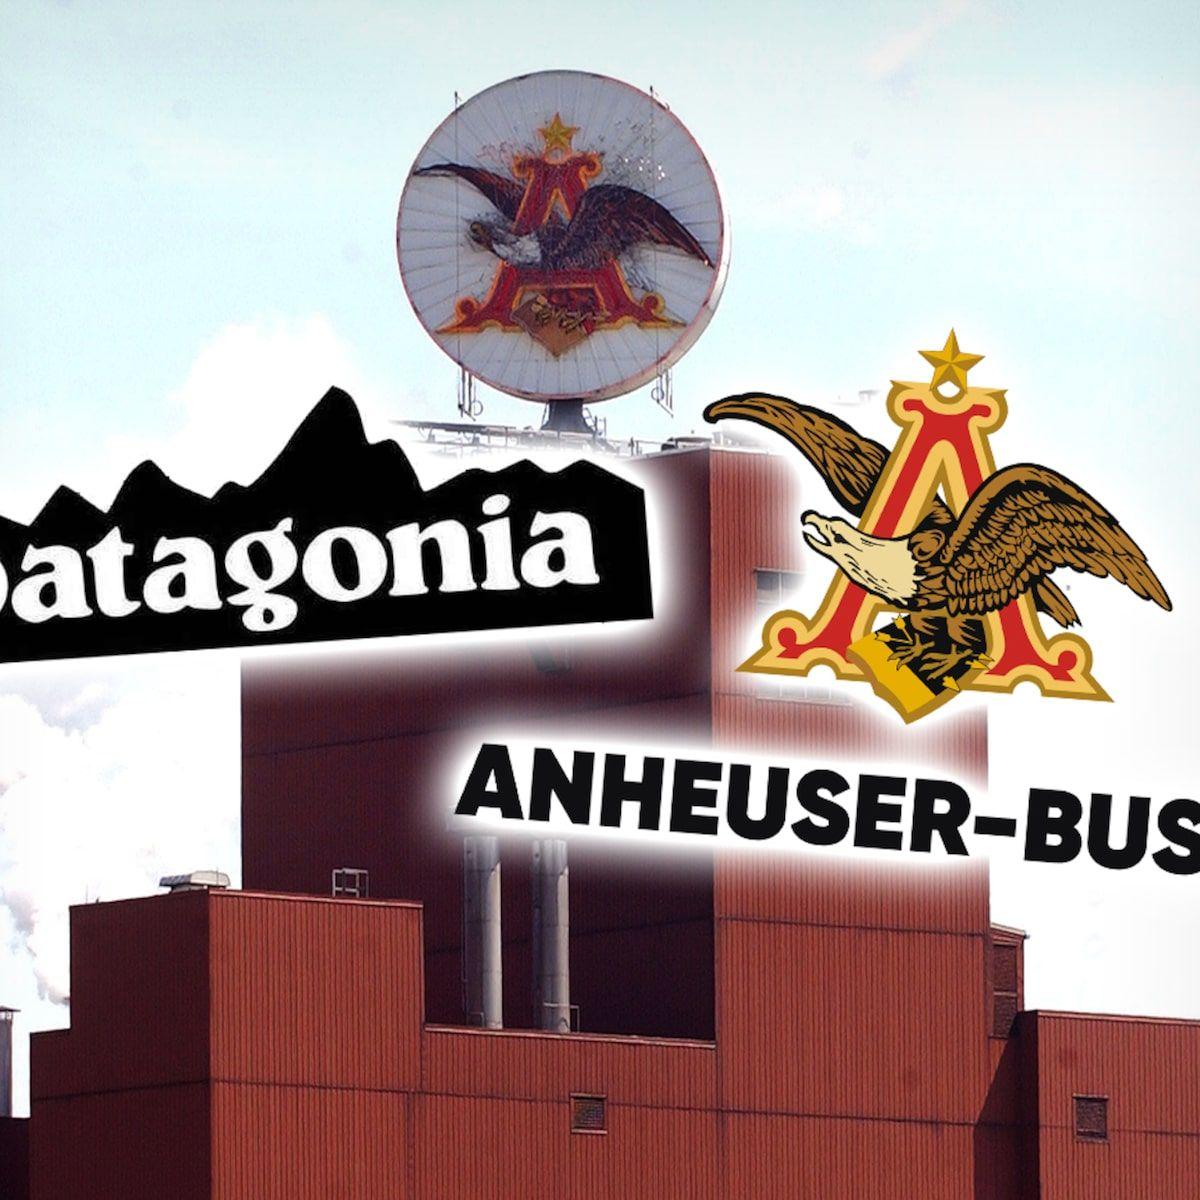 Anheuser-Busch Logo - Patagonia Sues Anheuser-Busch for Putting Its Name on New Beer